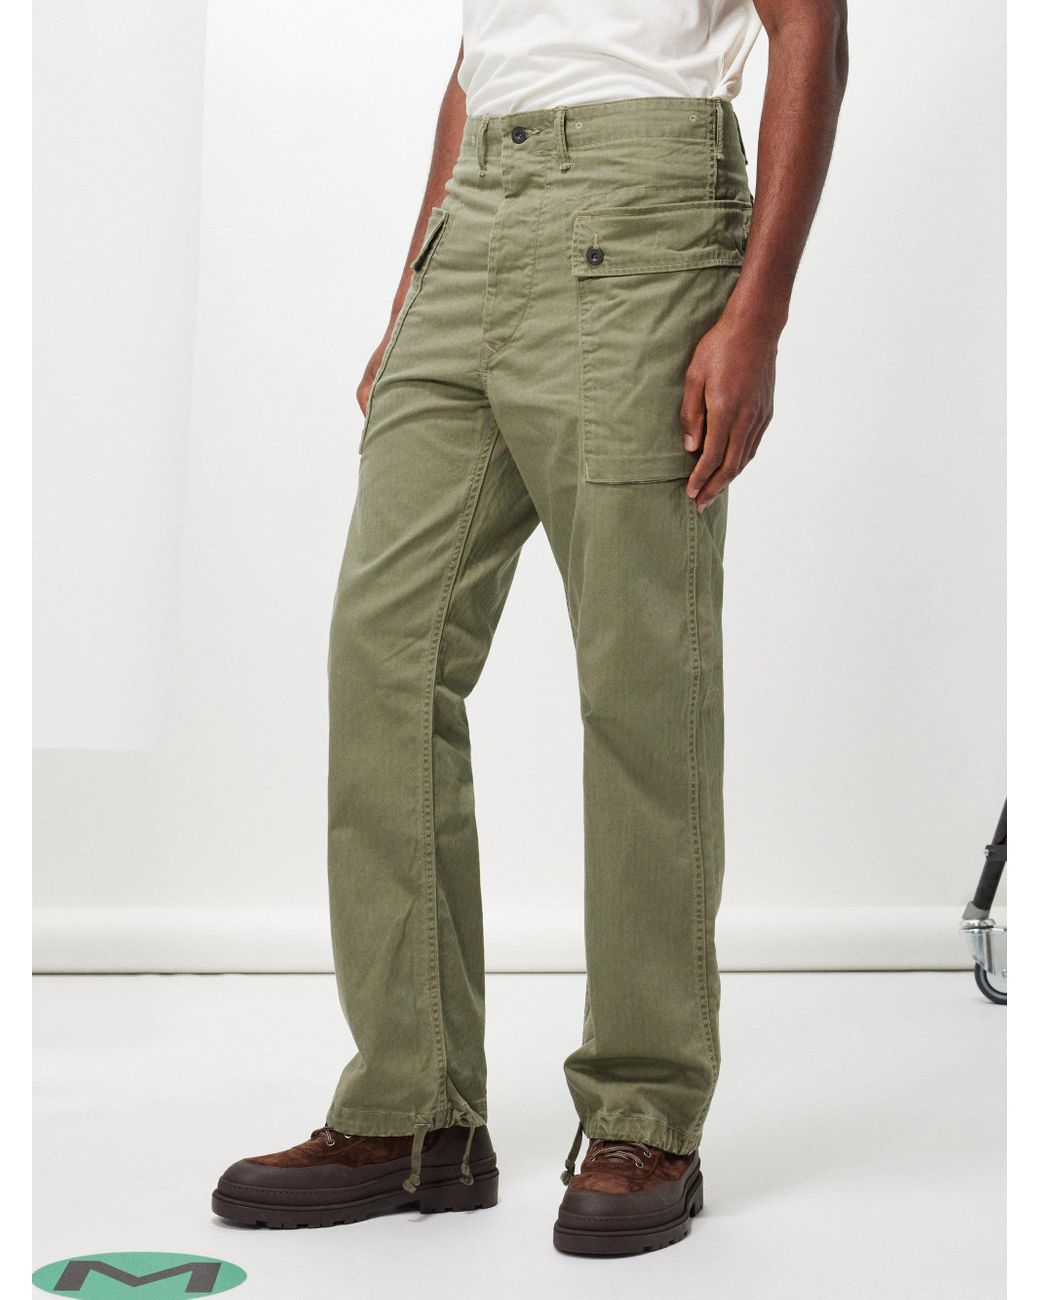 Stone Island - Brushed Cotton Canvas Cargo Pants | HBX - Globally Curated  Fashion and Lifestyle by Hypebeast